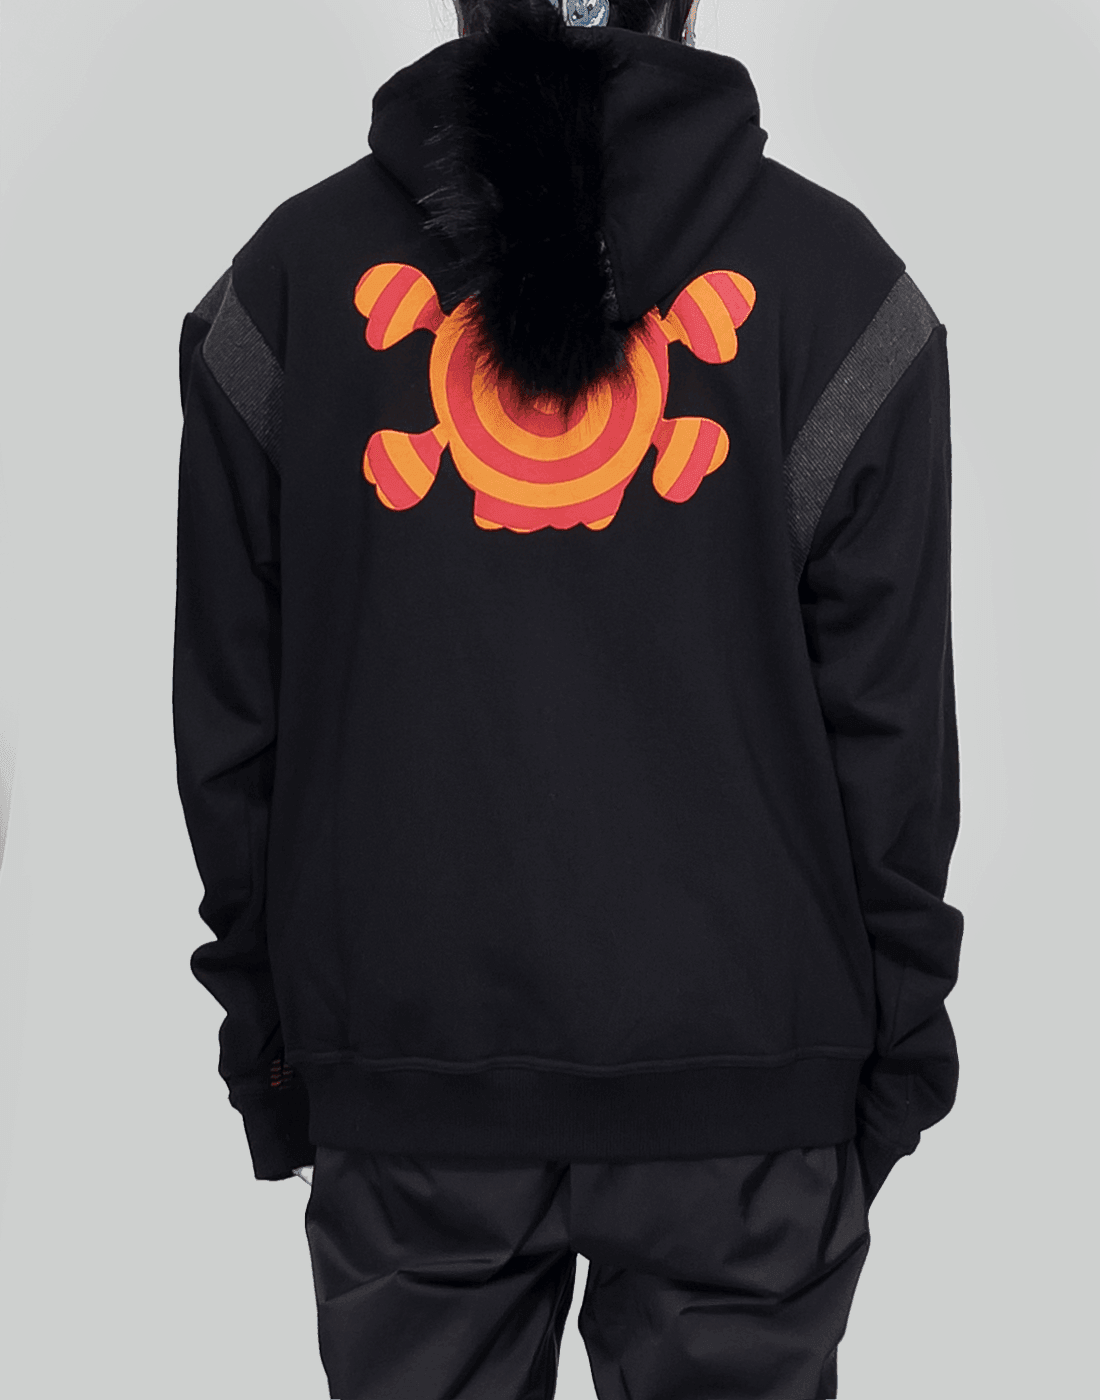 99%IS- " 1%ove " Mohican Hoodie - 082plus